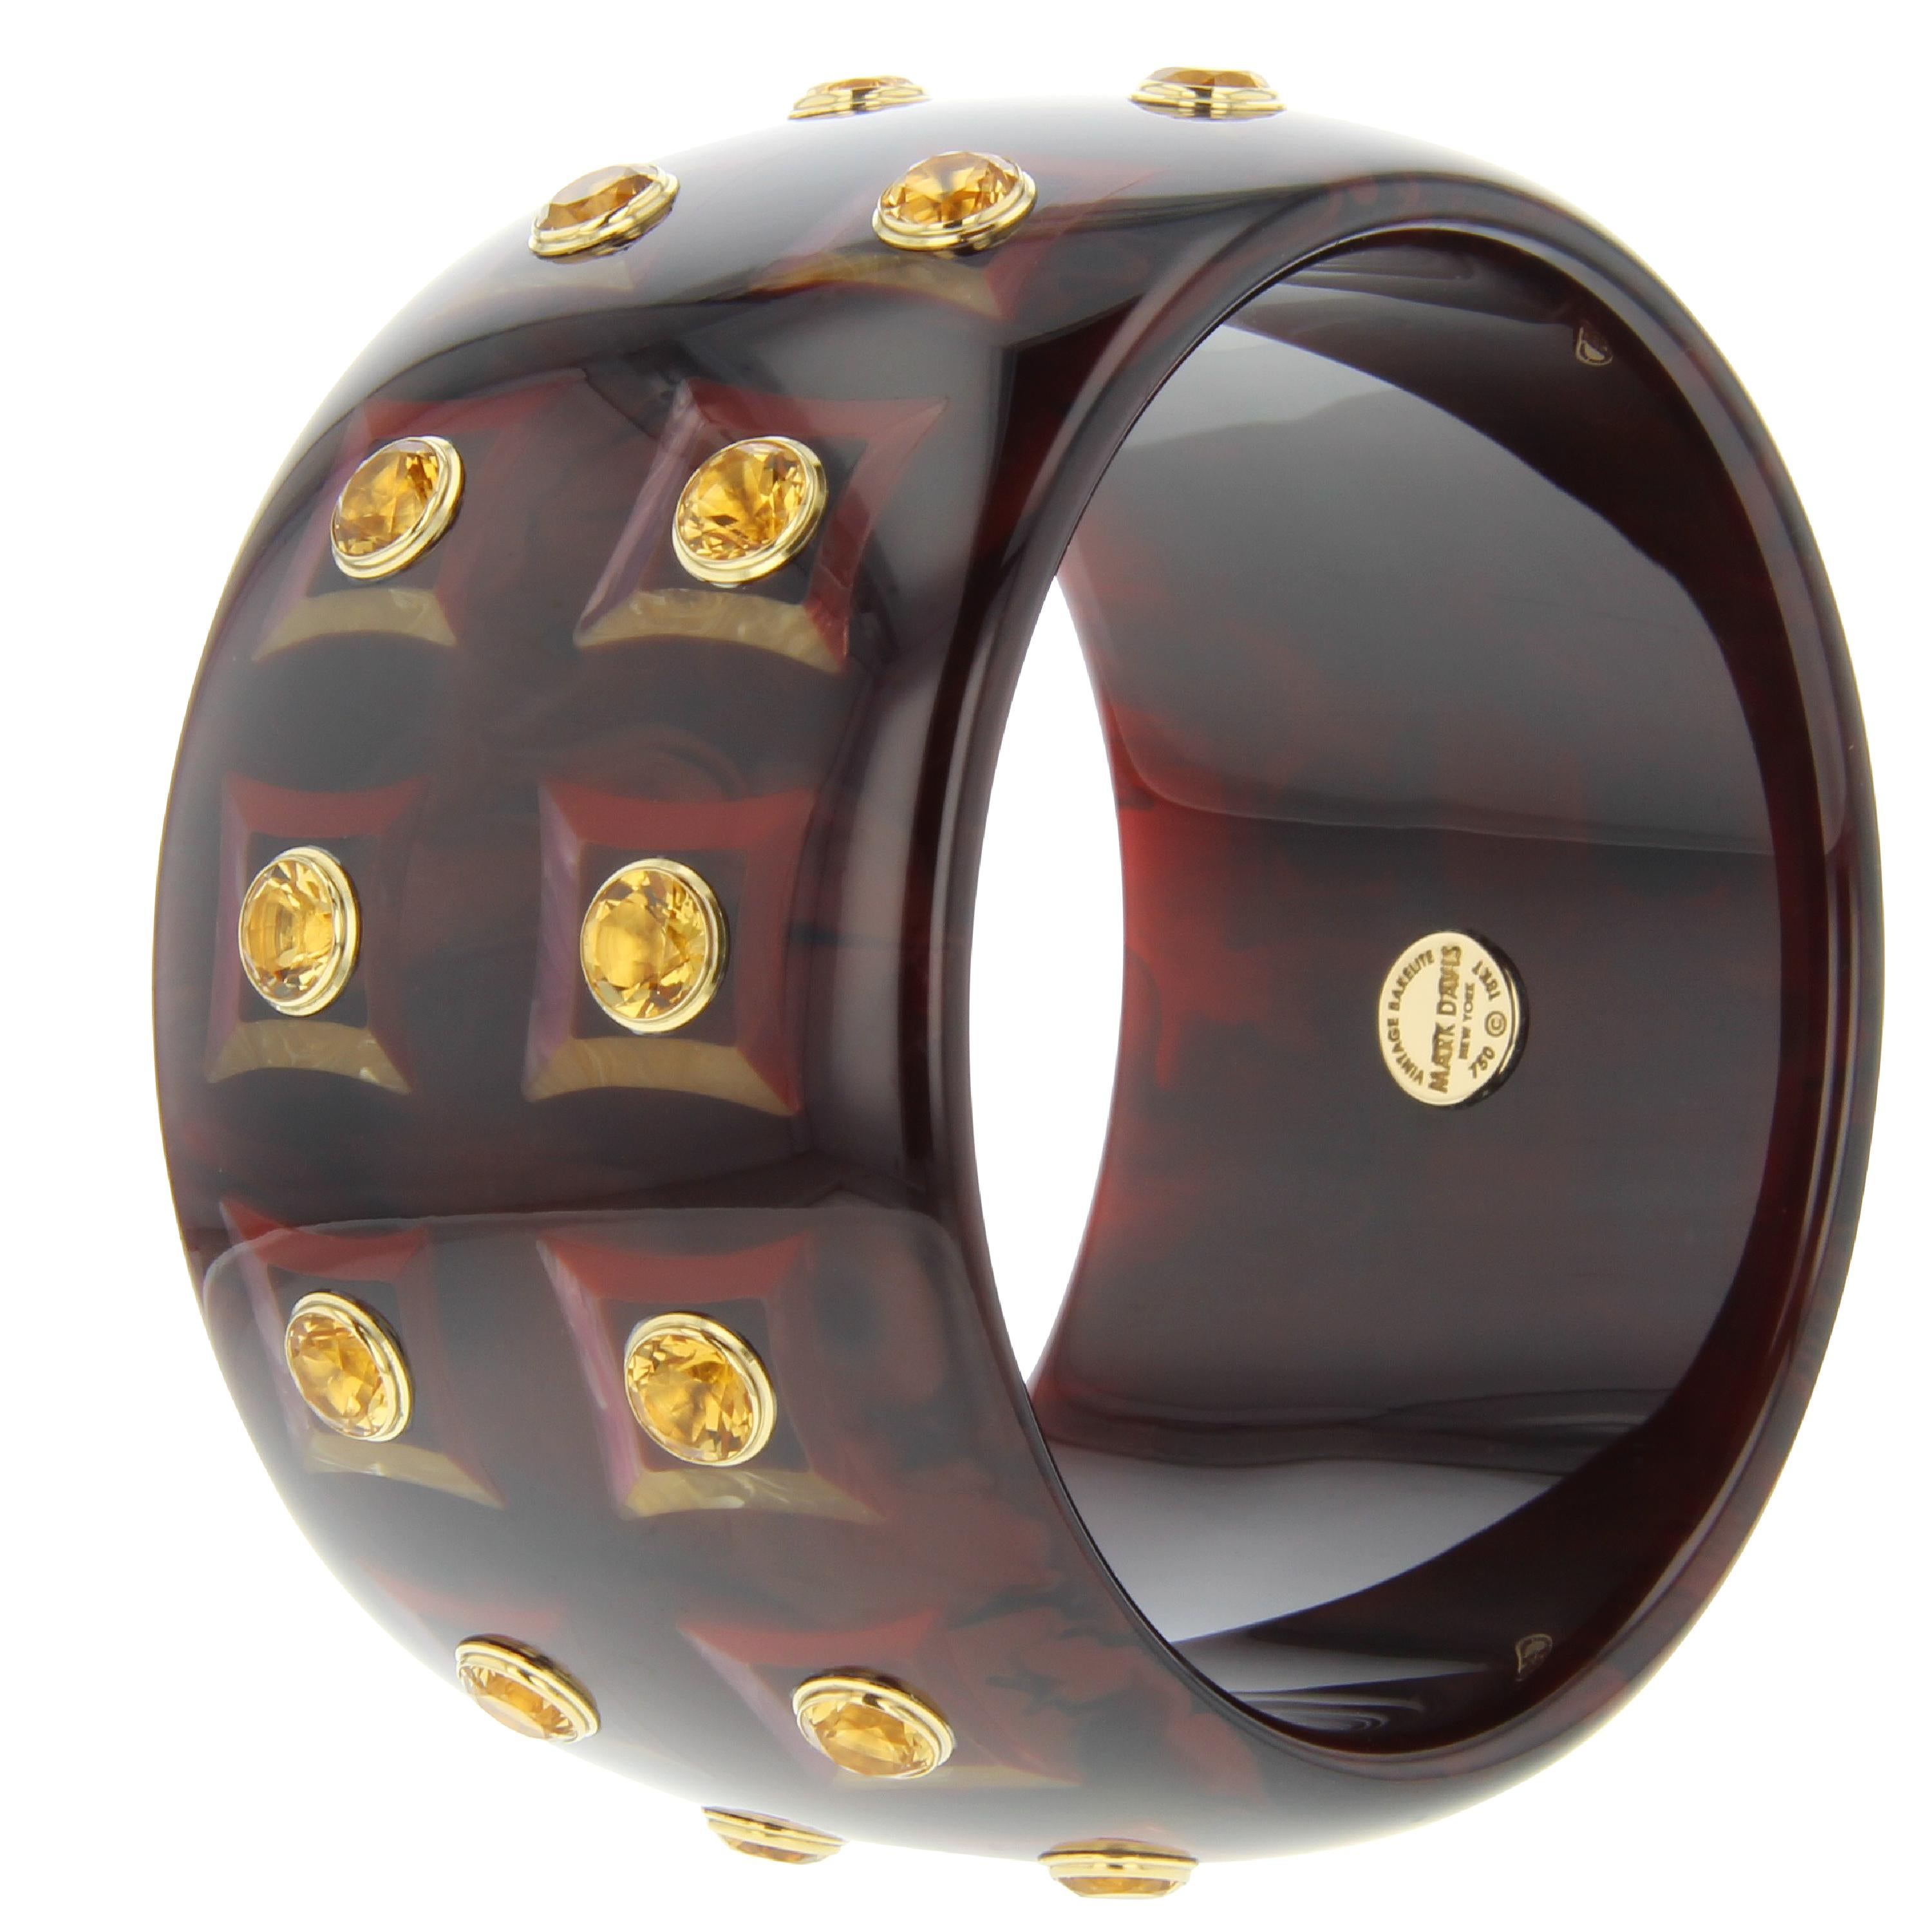 This stunning and substantial Mark Davis statement bangle was made using a very rich, deep, marbled brown vintage bakelite. An inlay pattern of slightly indented squares frames each bezel-set stone. The inlay pattern is comprised of burgundy,